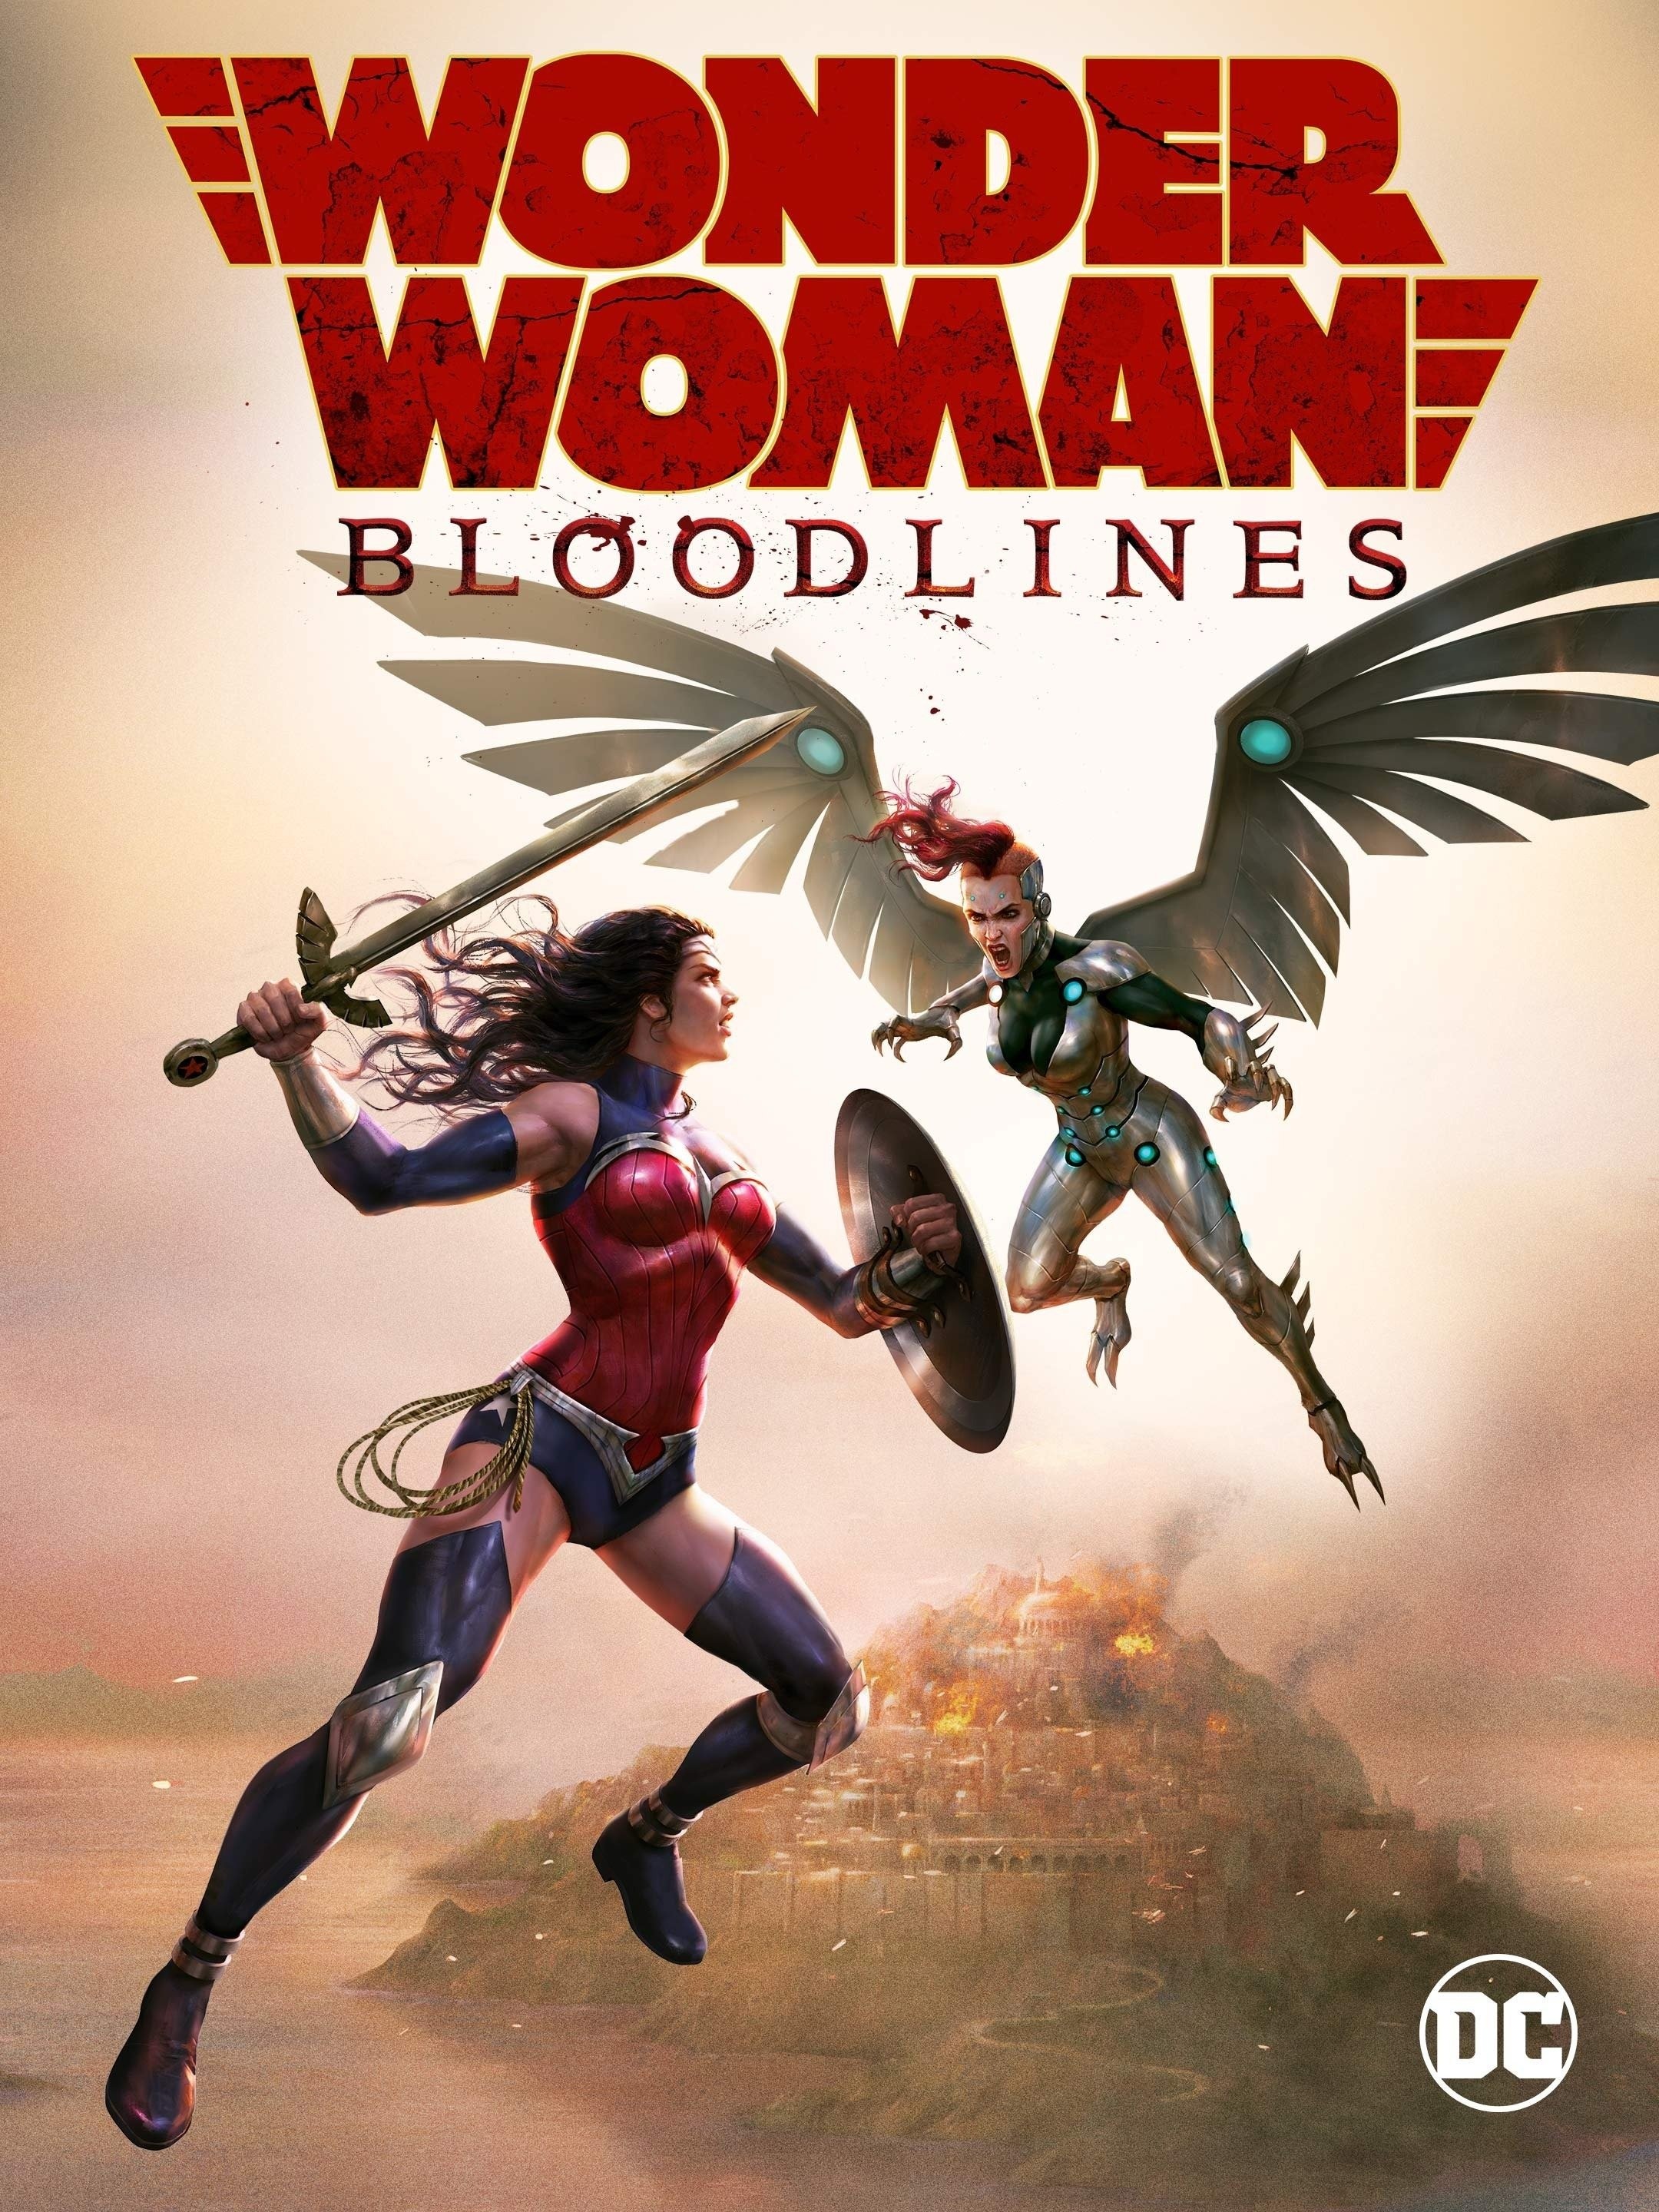 Wonder Woman: Bloodlines (2019) Review and Analysis – LAZY BOY POPCORN